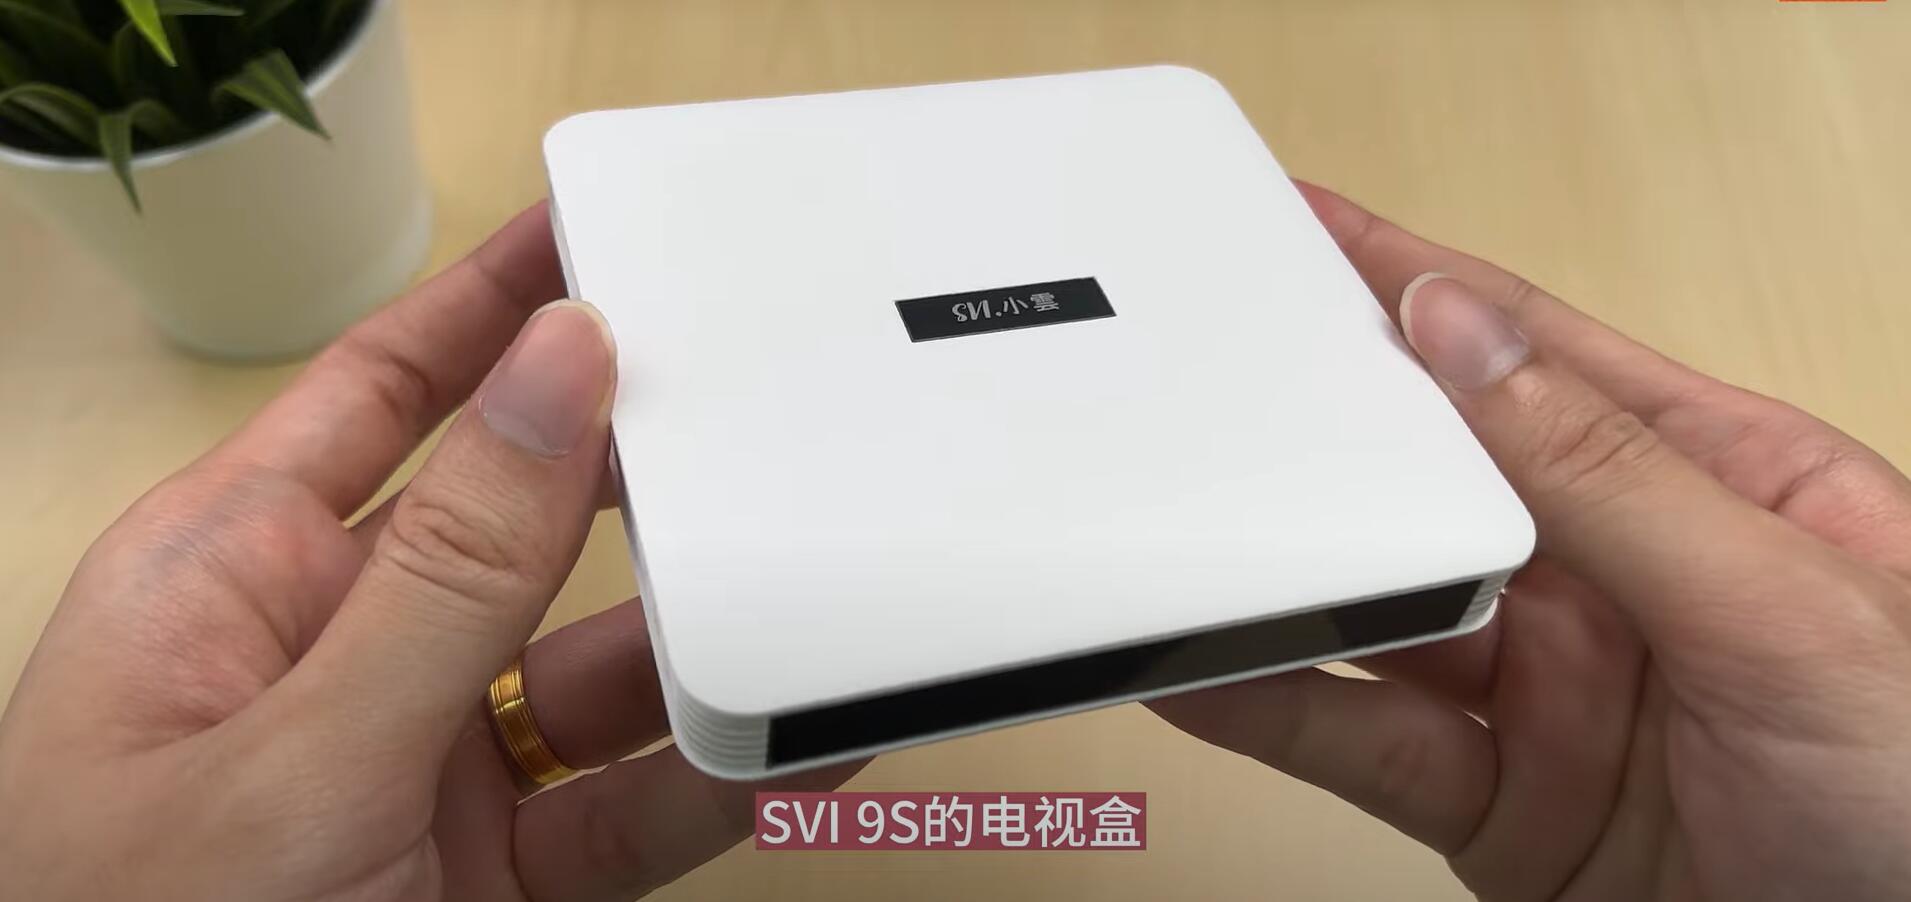 What Are the Functions and Advantages of Svicloud 9S TV Box?